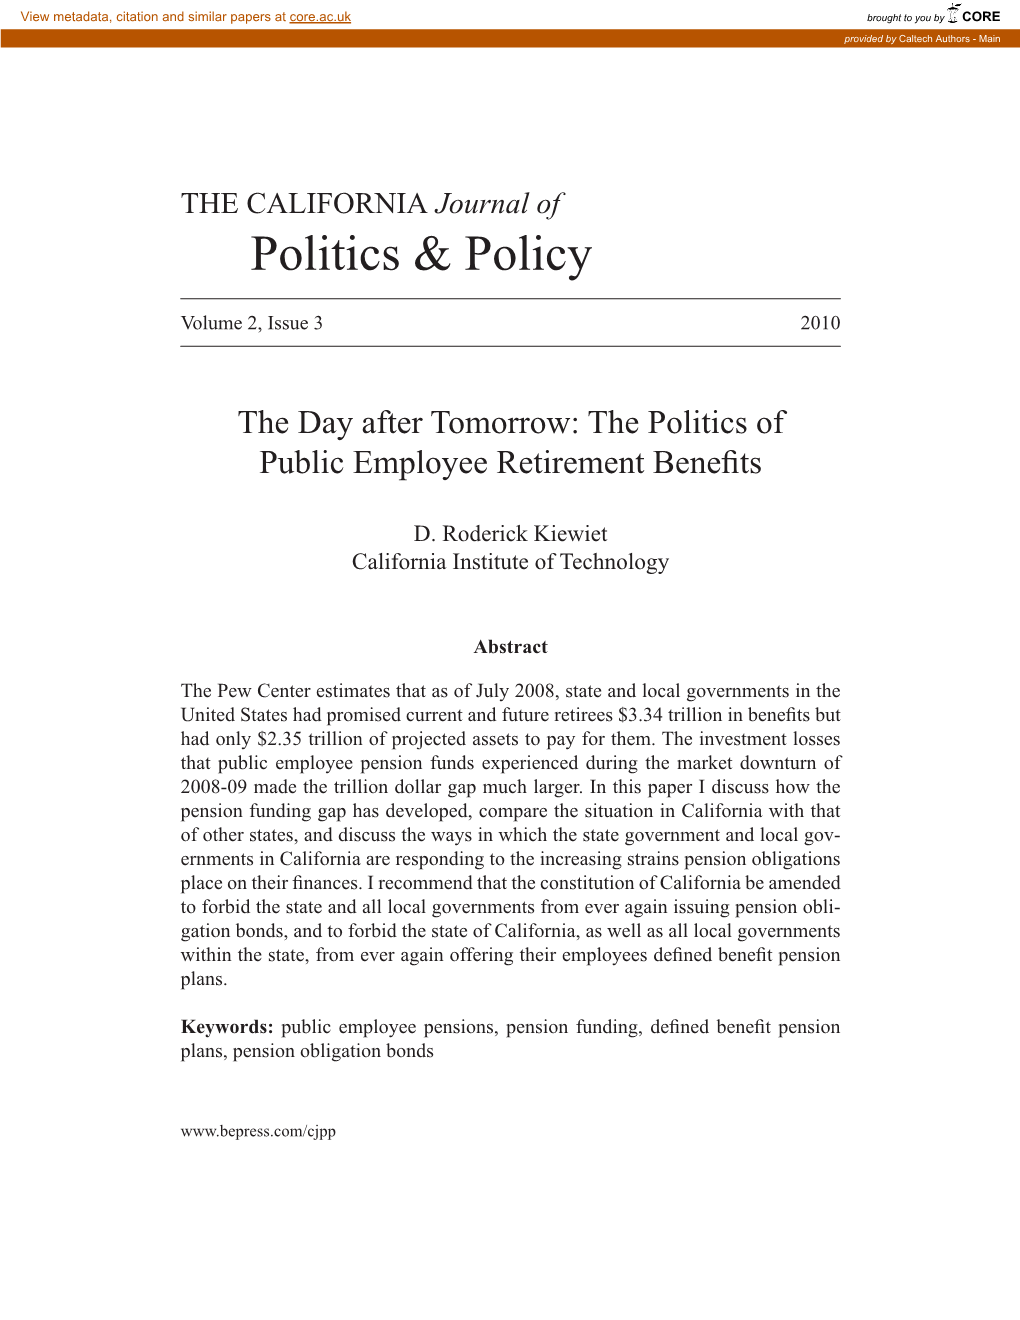 The Day After Tomorrow: the Politics of Public Employee Benefits